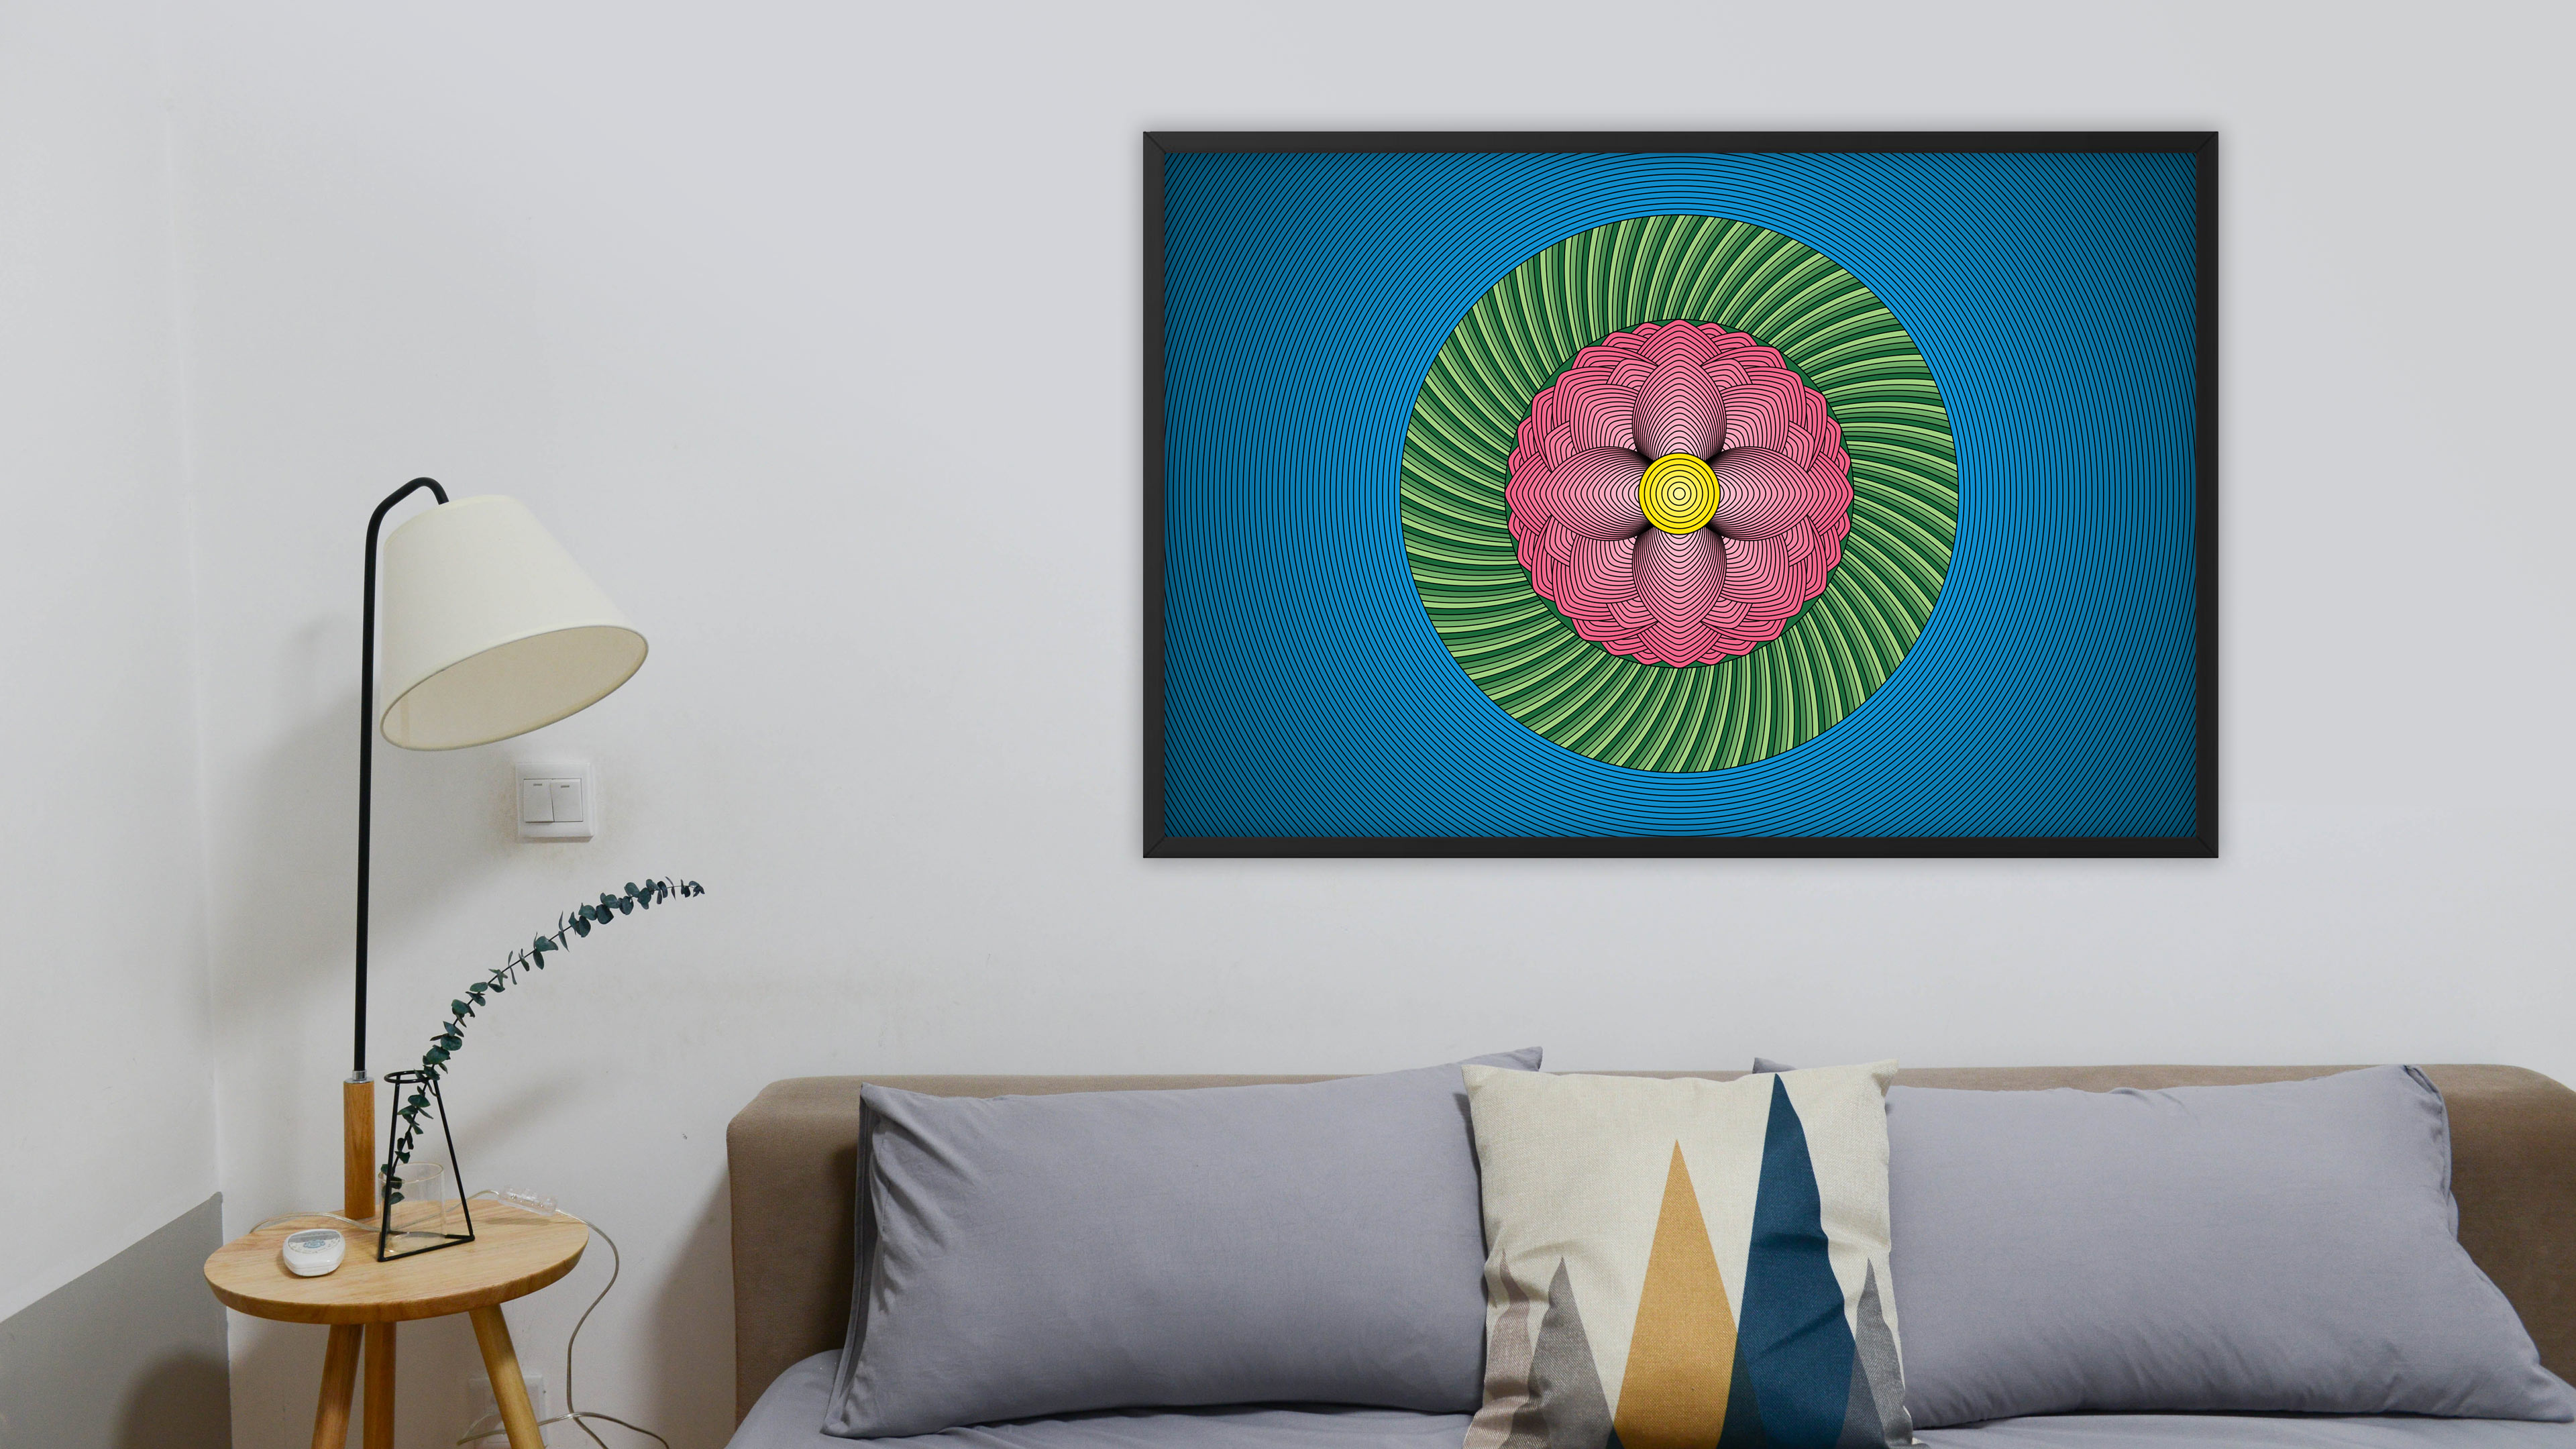 Photo of a large Lotus Flower art print in a black frame hanging on a wall over a sofa.